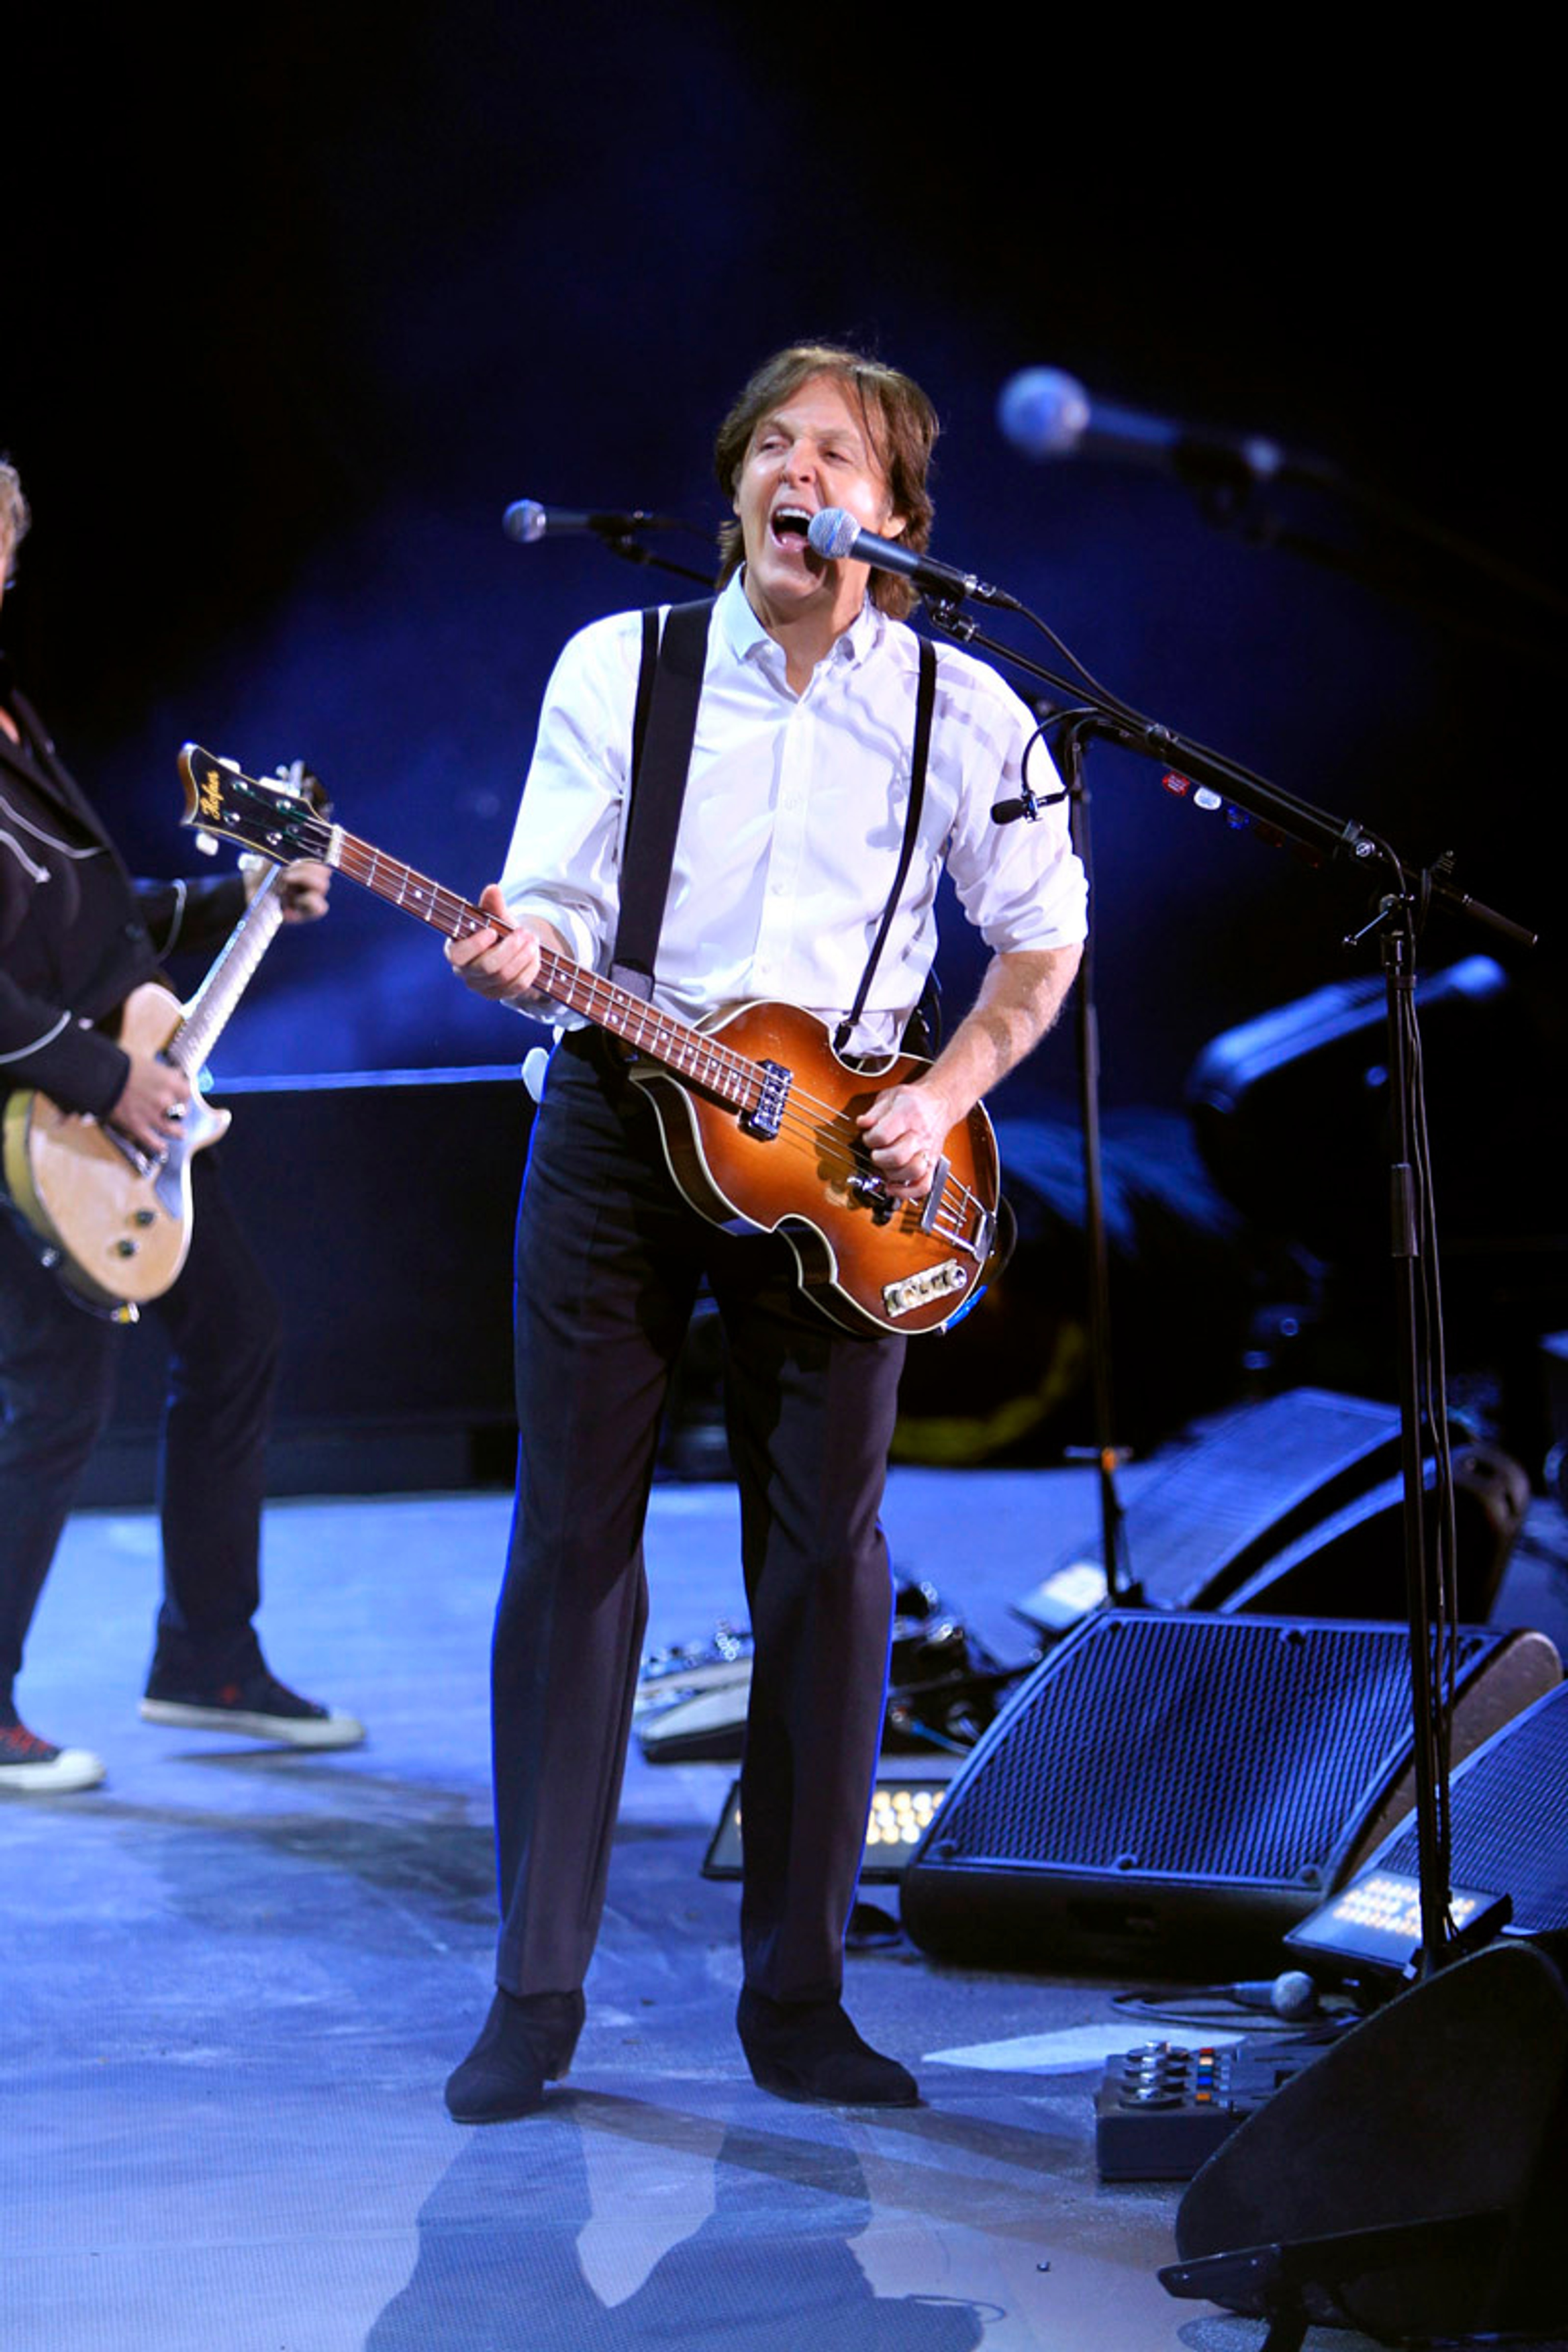 Paul with his Höfner on stage, Minute Maid Park, Houston, 14th November 2012